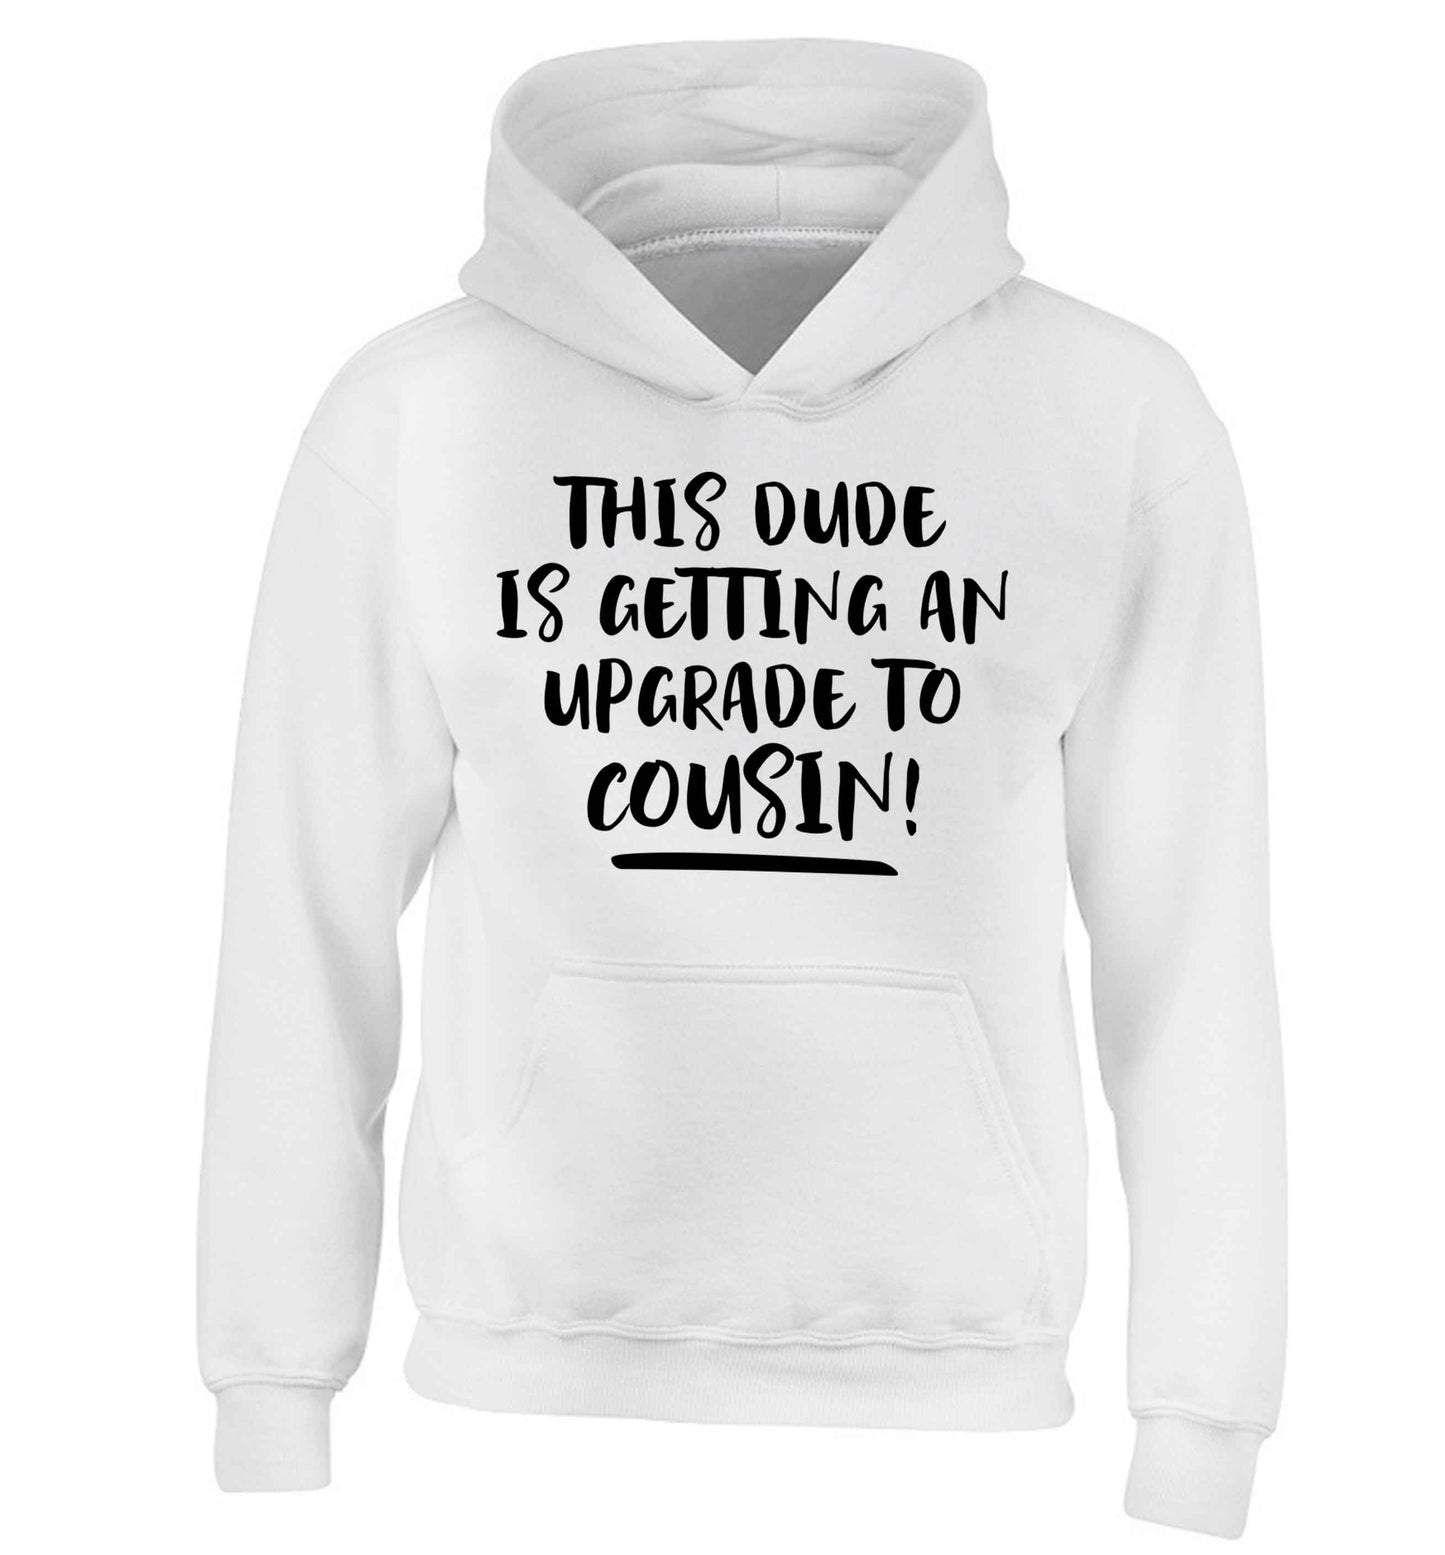 This dude is getting an upgrade to cousin! children's white hoodie 12-13 Years